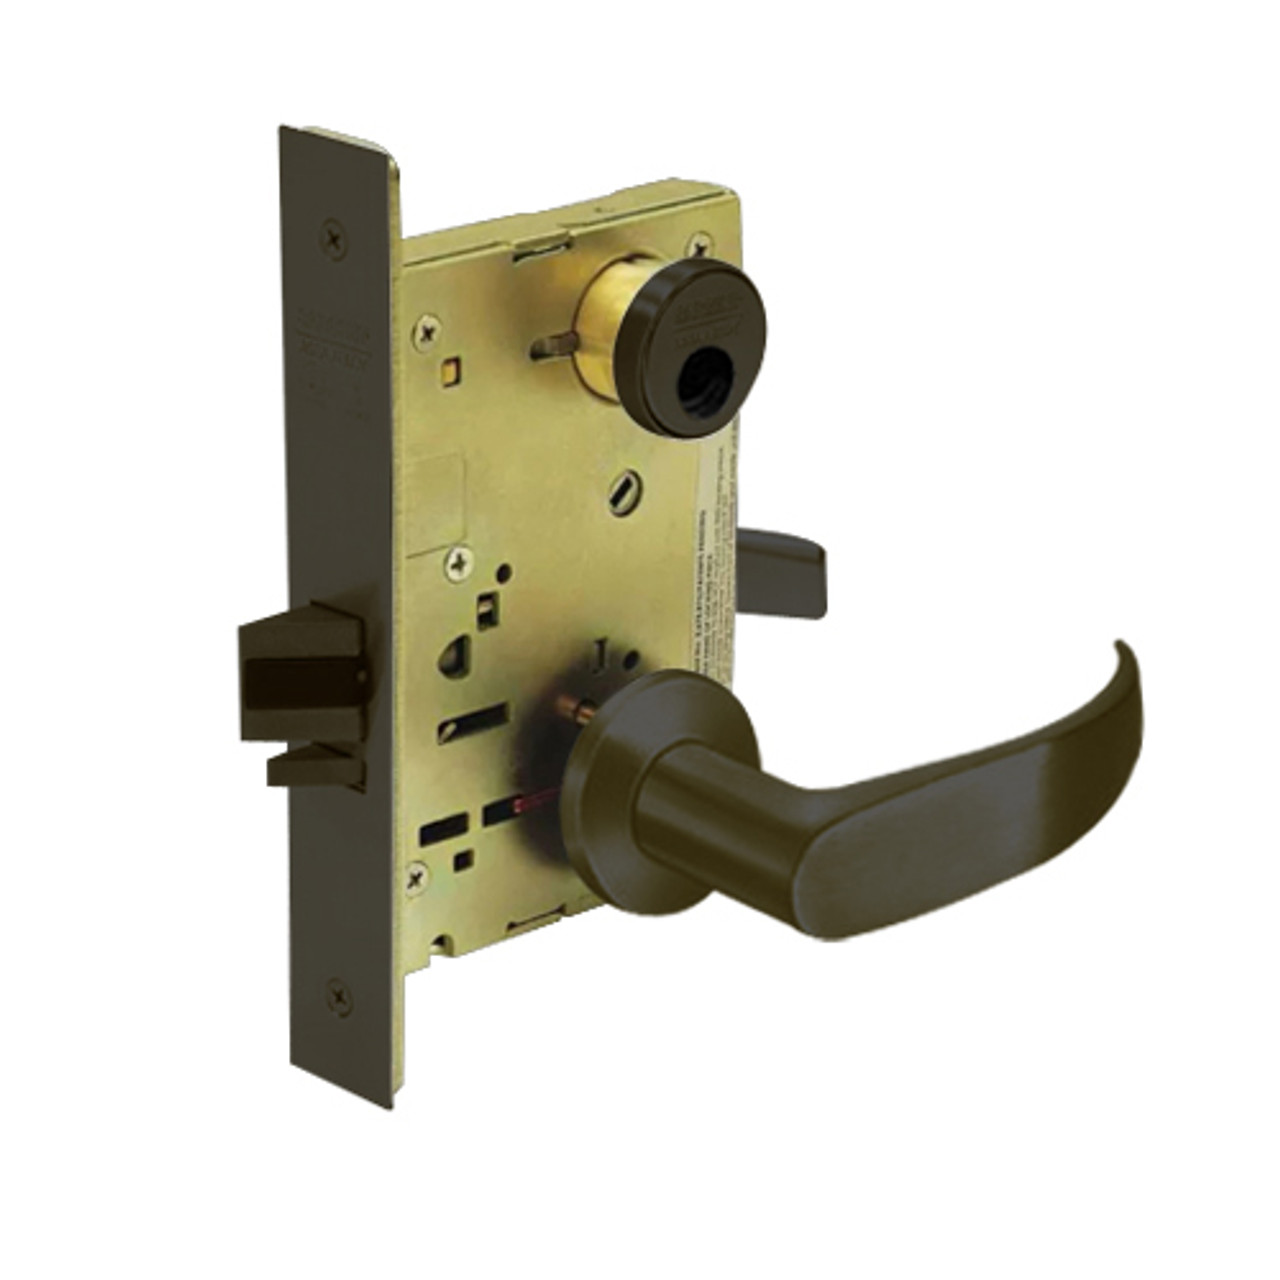 LC-8255-LNP-10B Sargent 8200 Series Office or Entry Mortise Lock with LNP Lever Trim Less Cylinder in Oxidized Dull Bronze